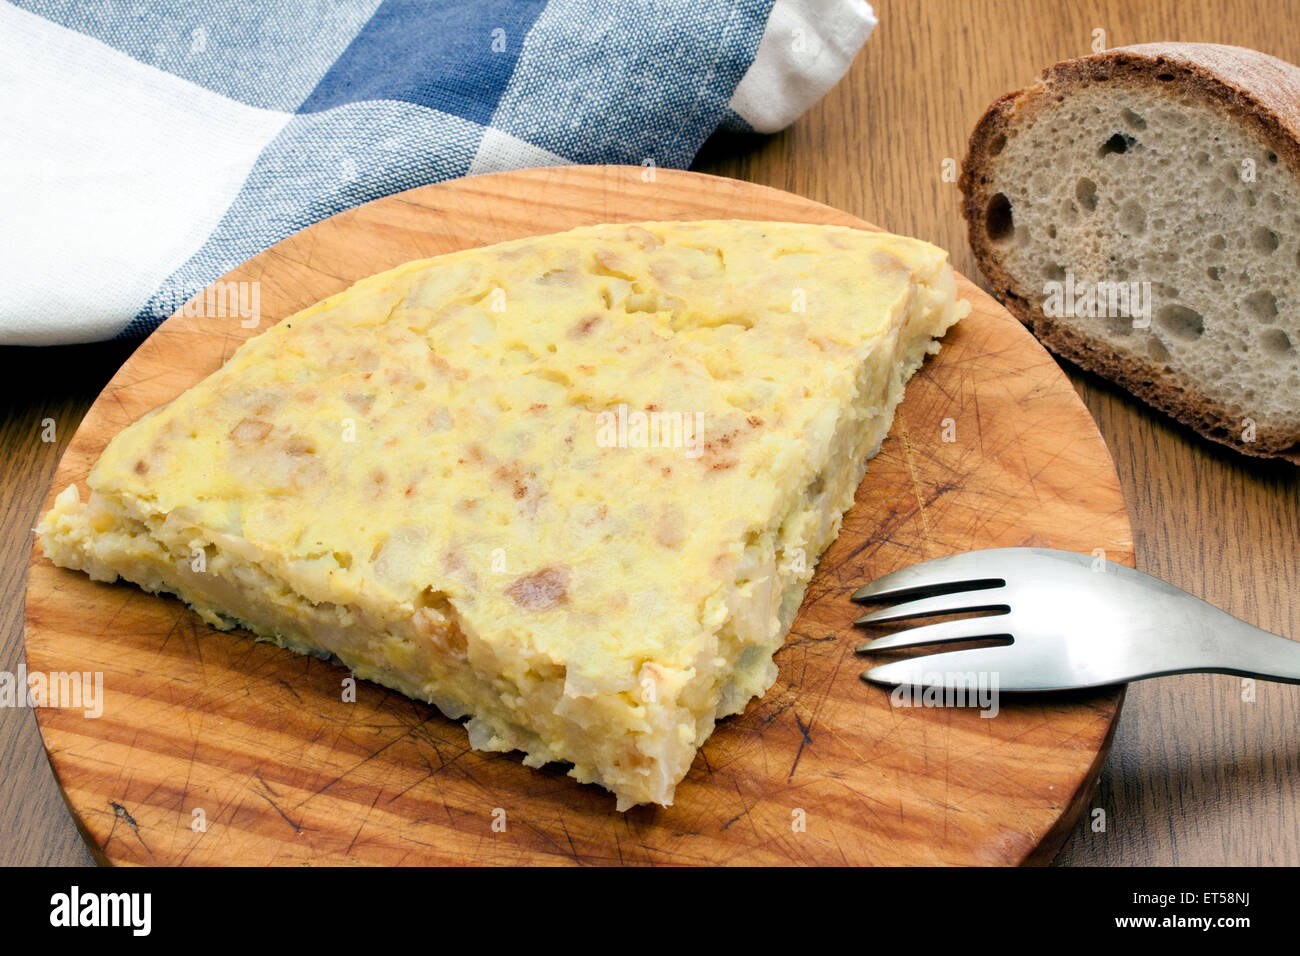 a piece of a spanish omelet over a wood board with a fork and a piece of cloth Stock Photo